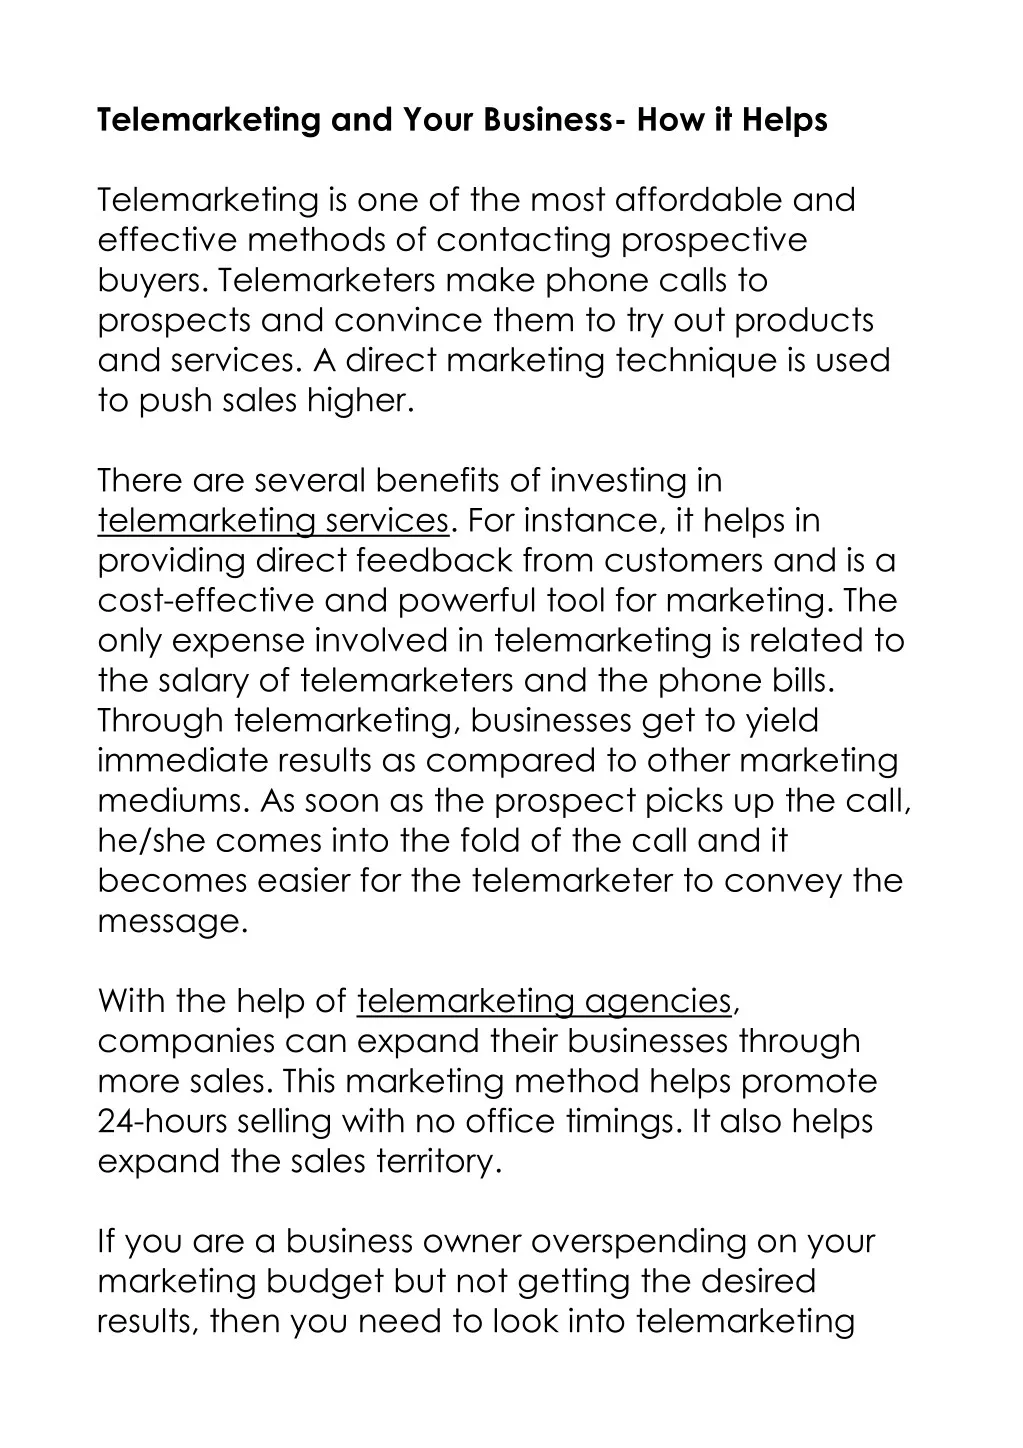 telemarketing and your business how it helps